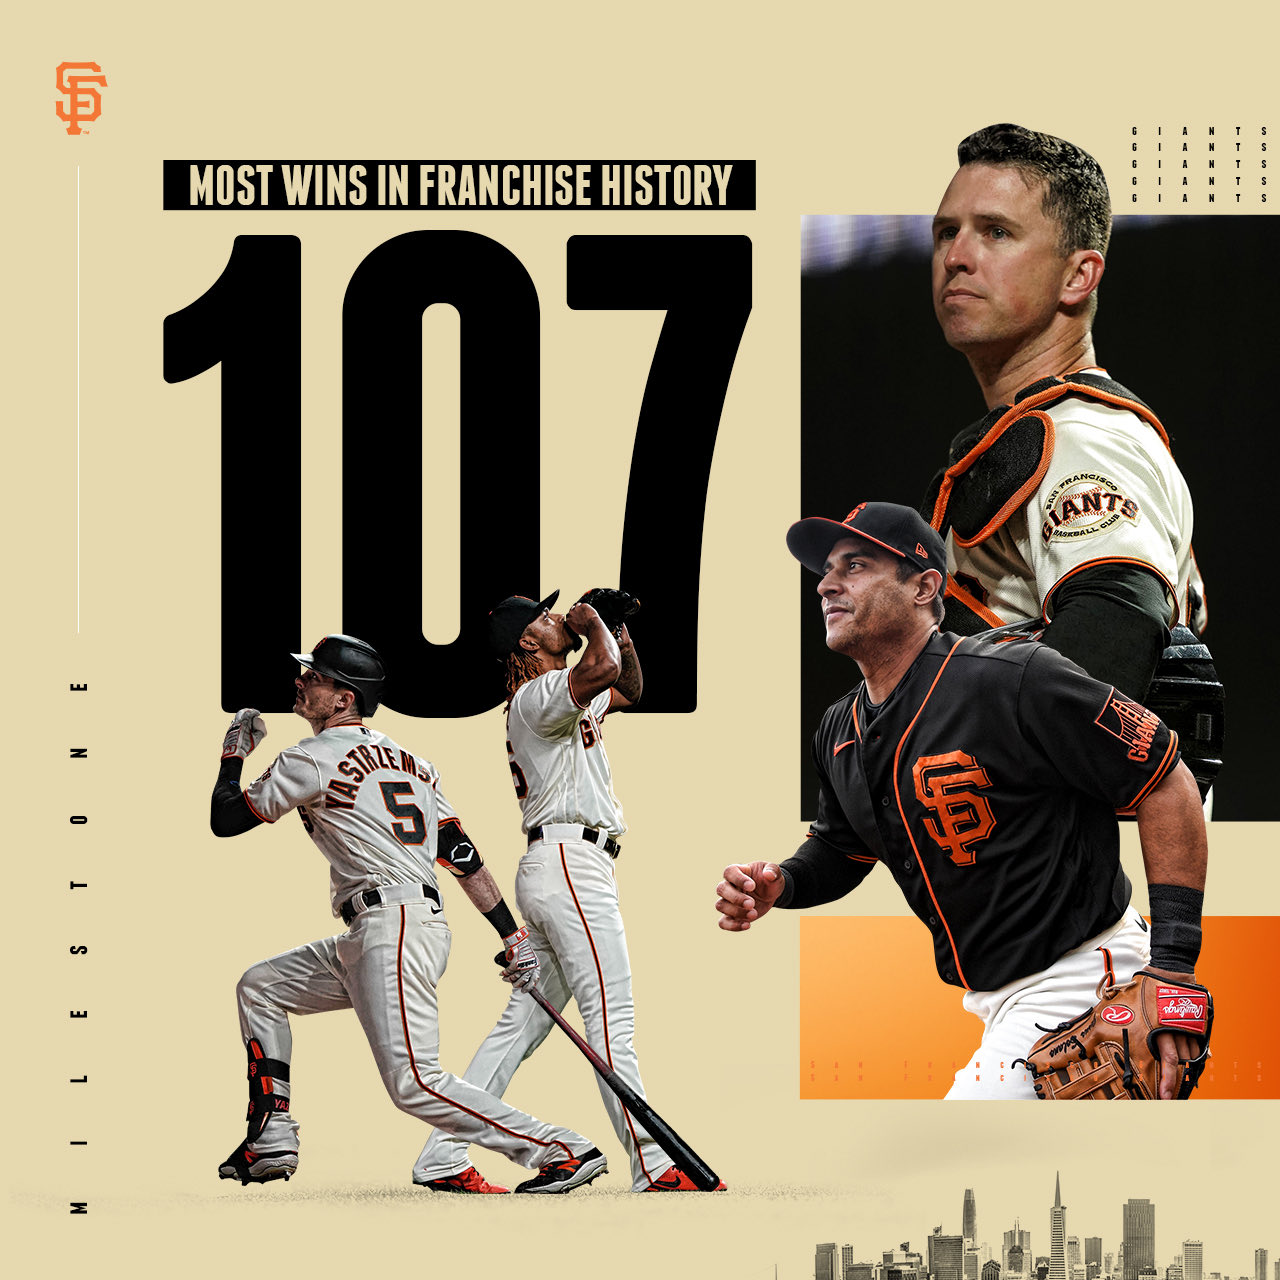 SFGiants on X: For the first time in the 138-year history of the